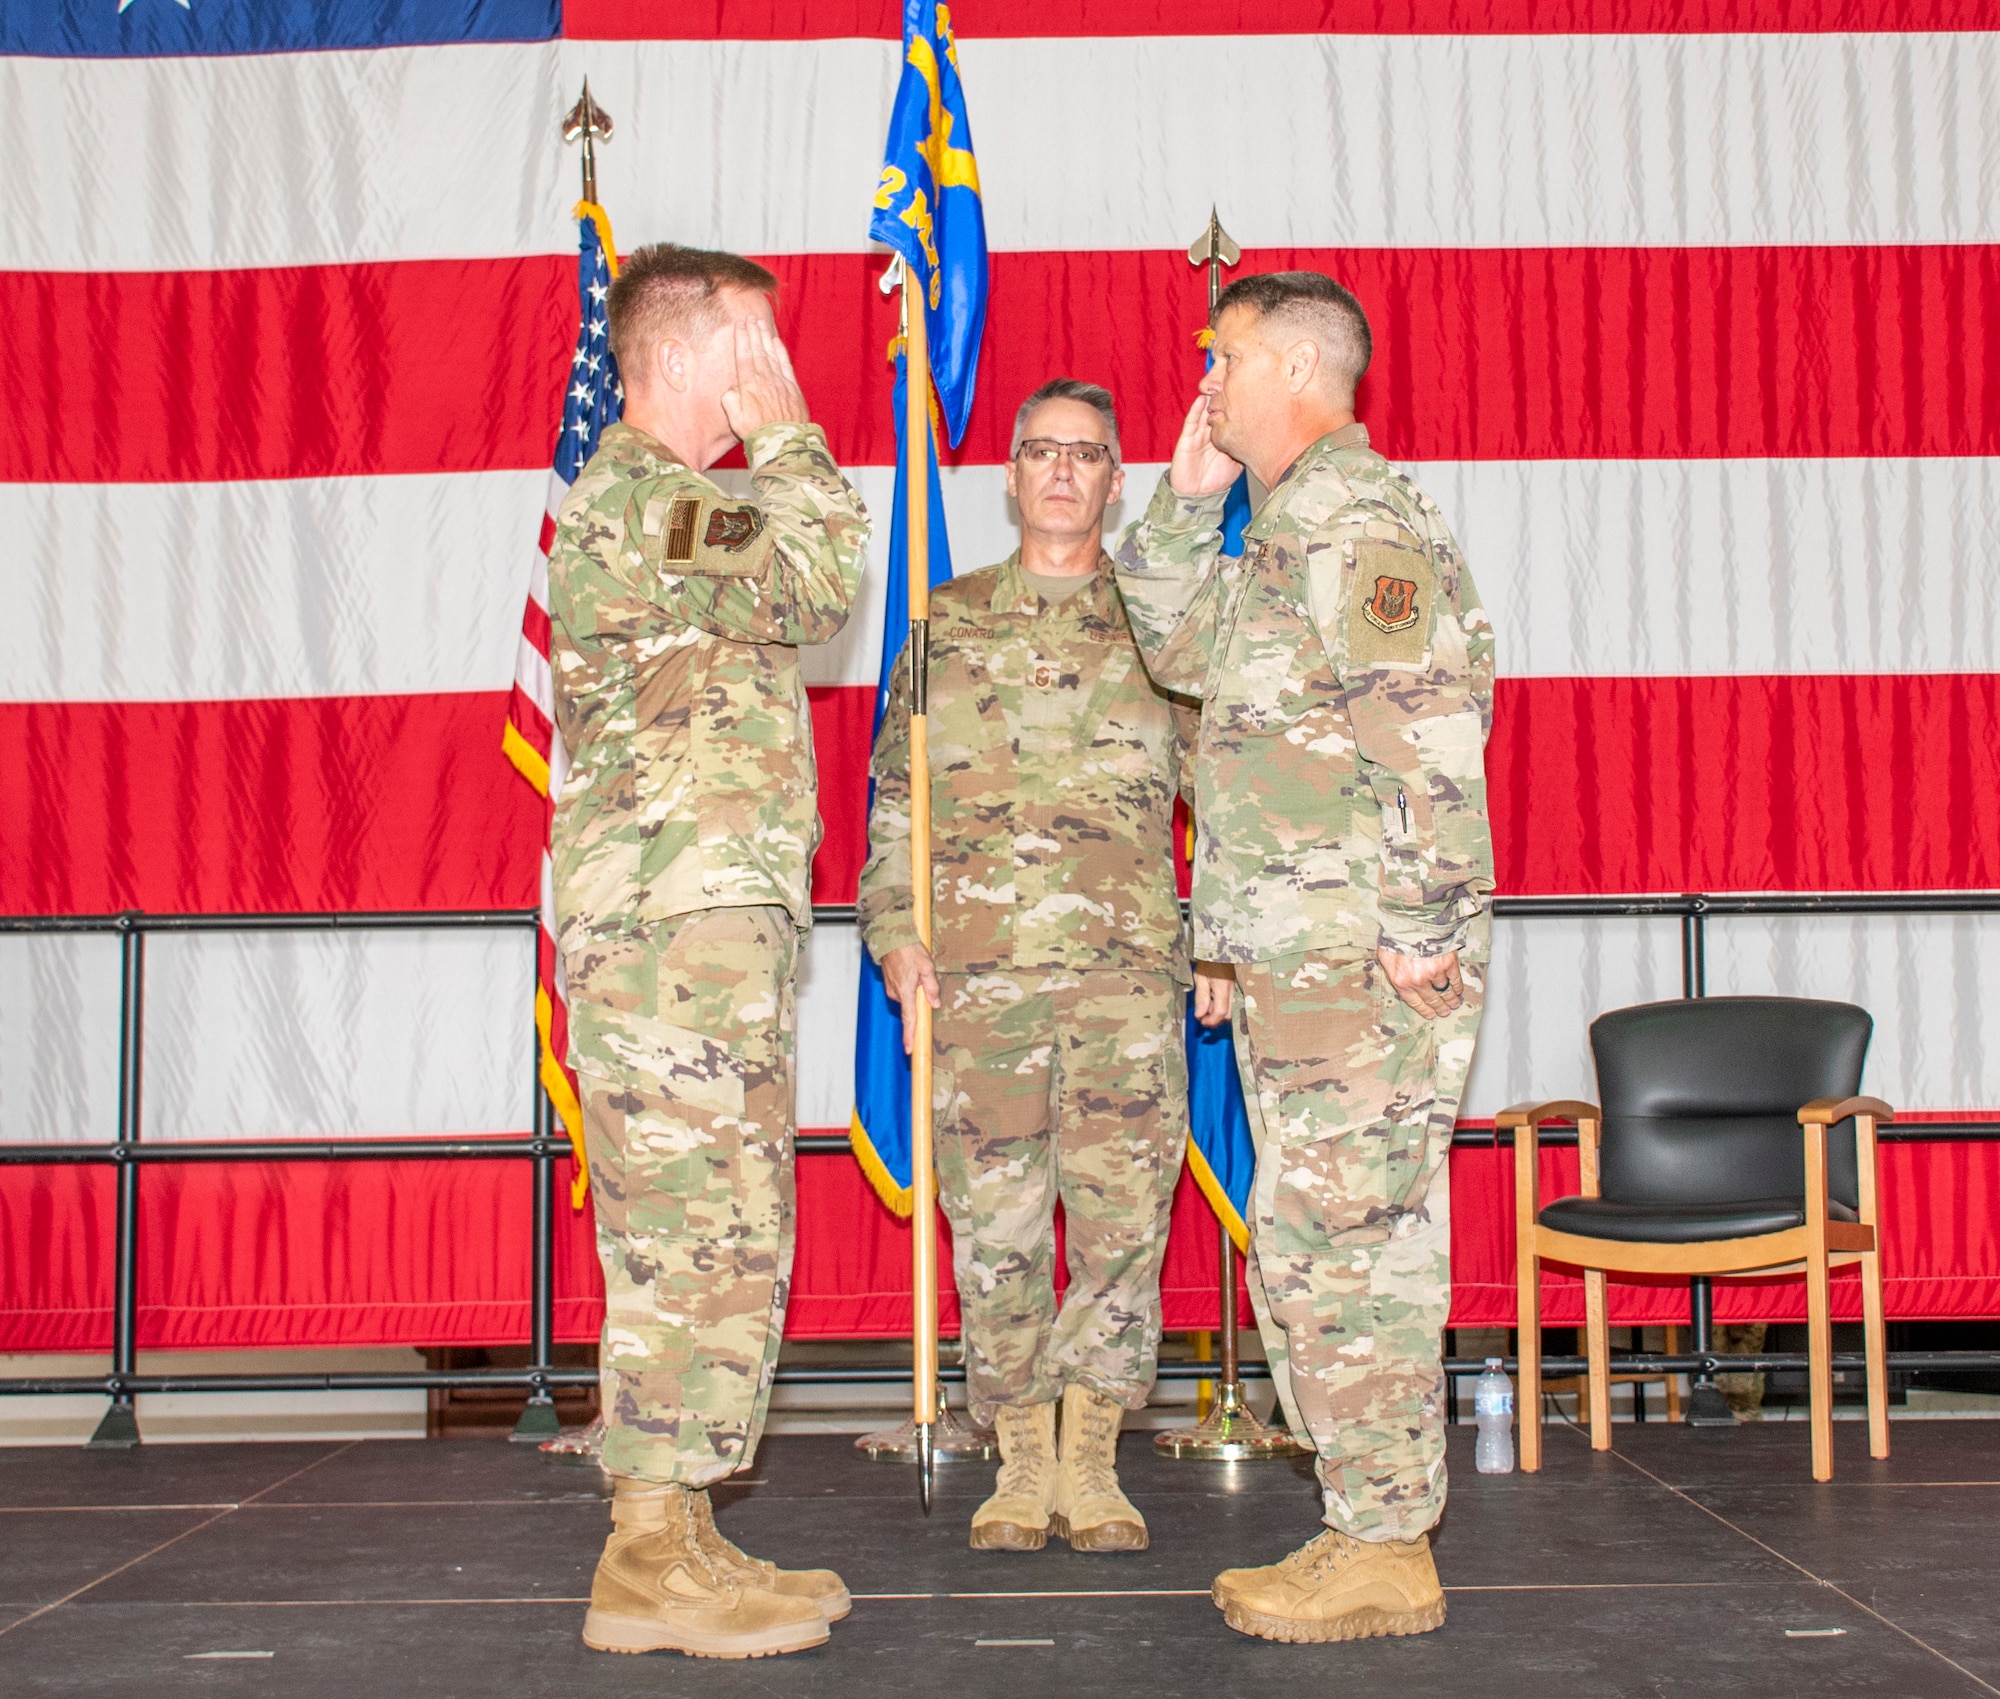 U.S. Air Force Lt. Col. William McLeod renders his first salute to Brig. Gen. Michael Schultz, 442d Fighter Wing Commander, after assuming command of the 442d Maintenance Group on Aug. 7, 2021 at Whiteman Air Force Base, Mo. (U.S. Air Force photo by Maj. Shelley Ecklebe)